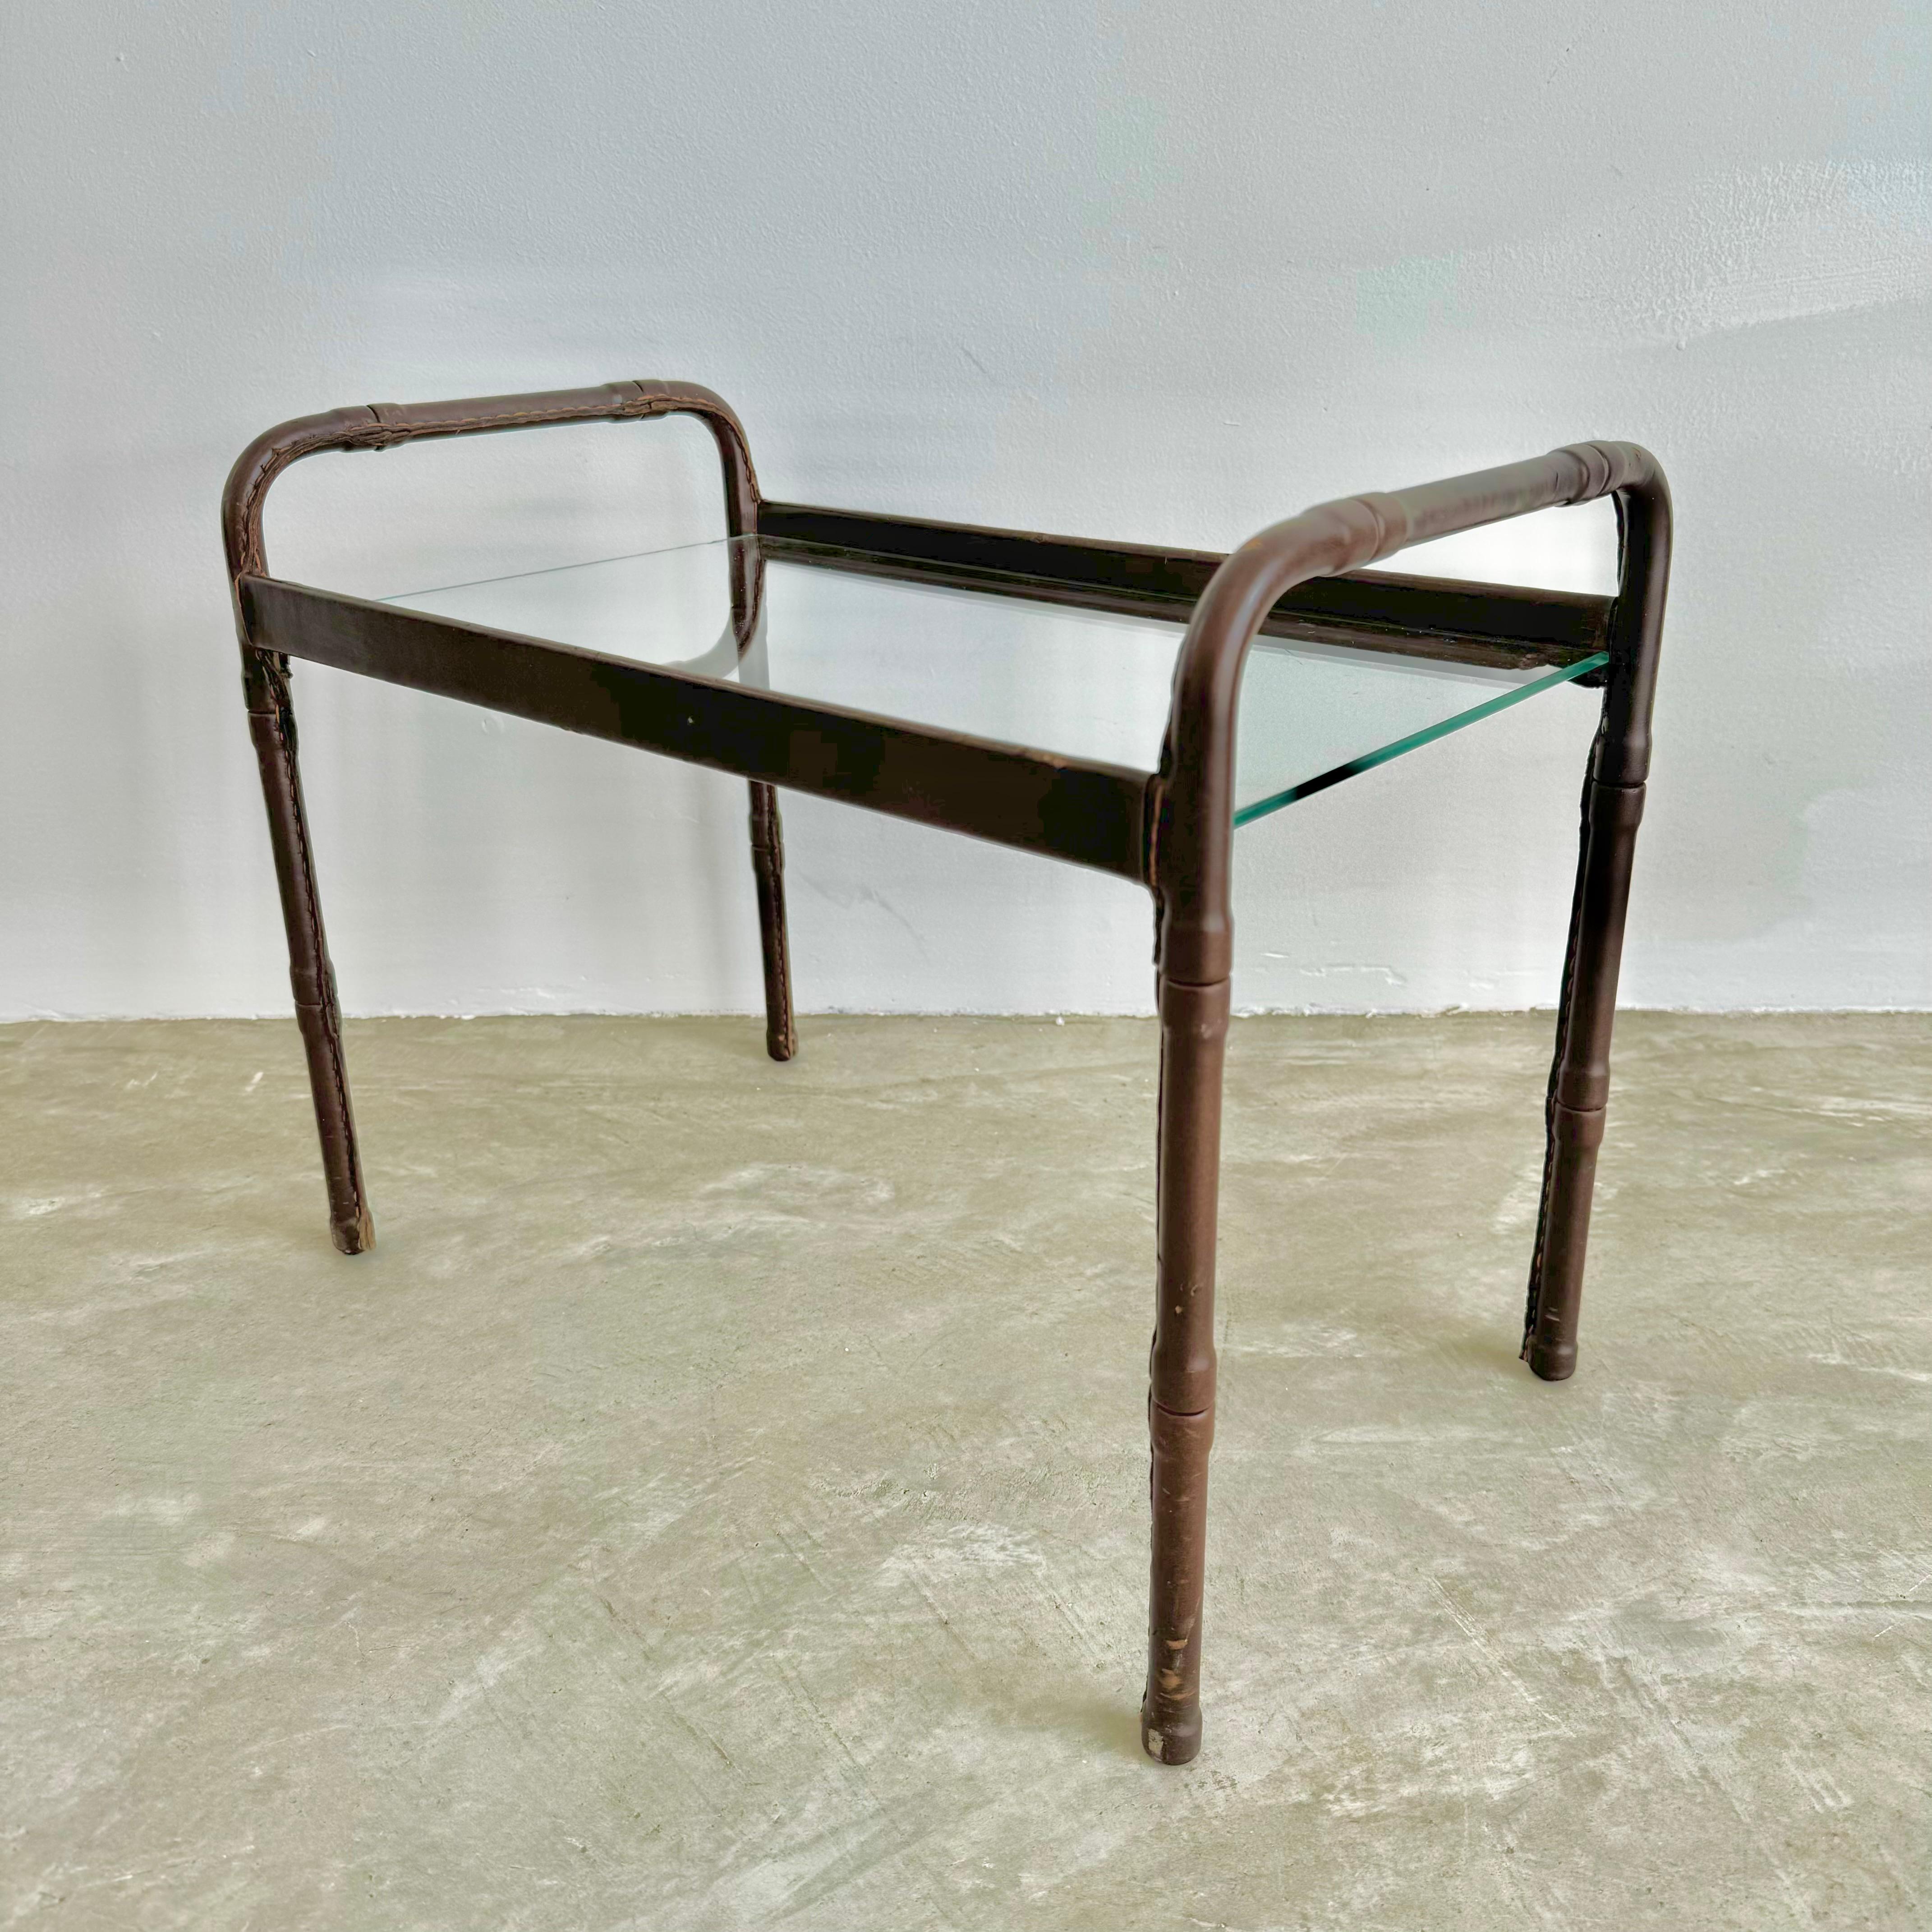 Jacques Adnet Leather and Glass Side Table, 1950s France For Sale 3